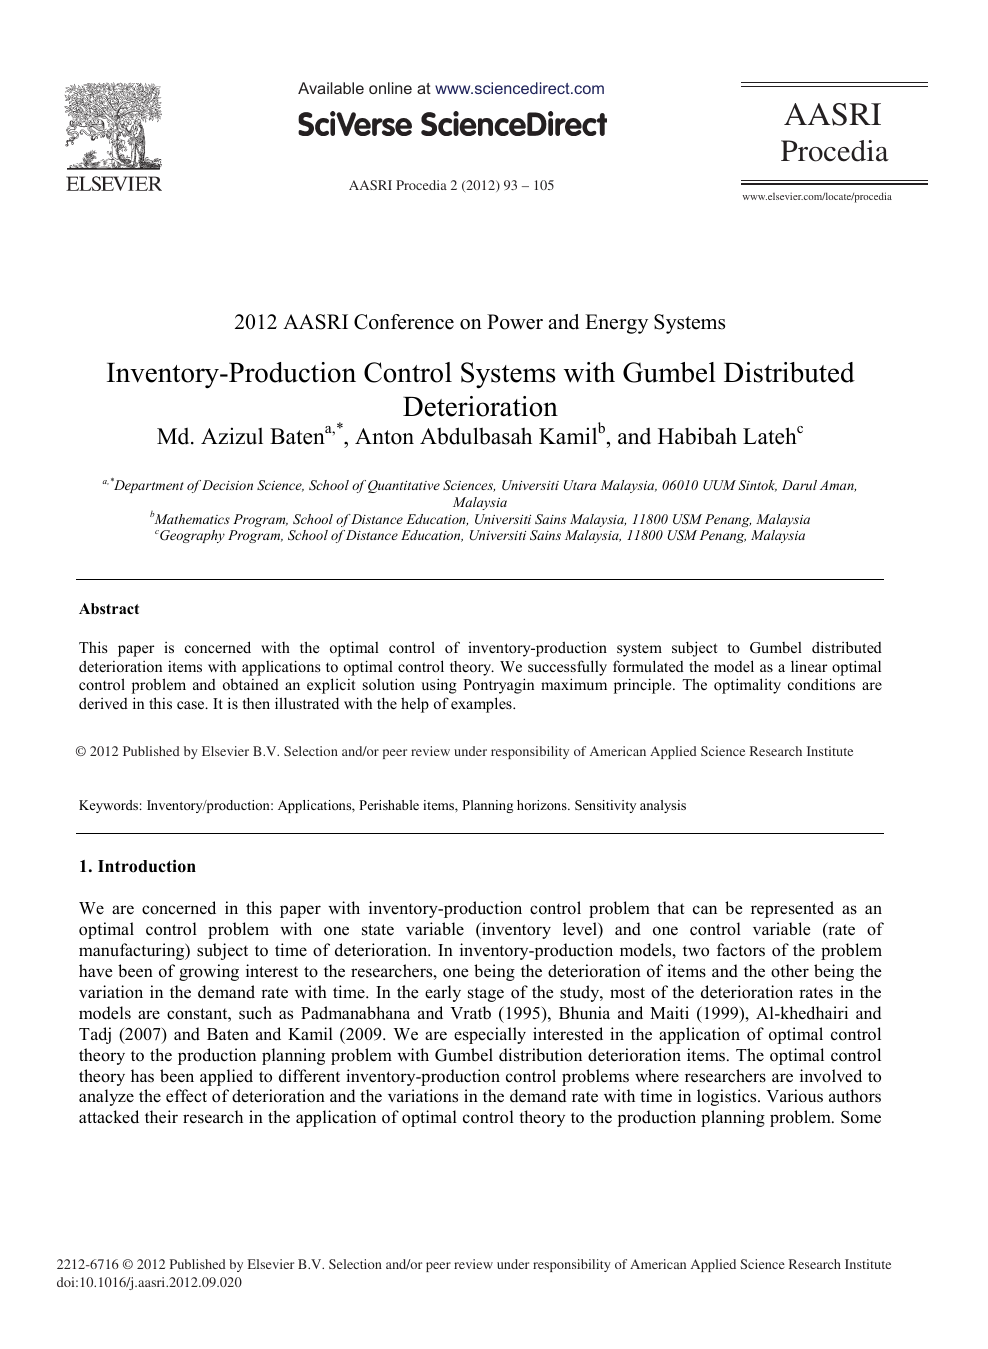 Inventory Production Control Systems With Gumbel Distributed Deterioration Topic Of Research Paper In Mathematics Download Scholarly Article Pdf And Read For Free On Cyberleninka Open Science Hub